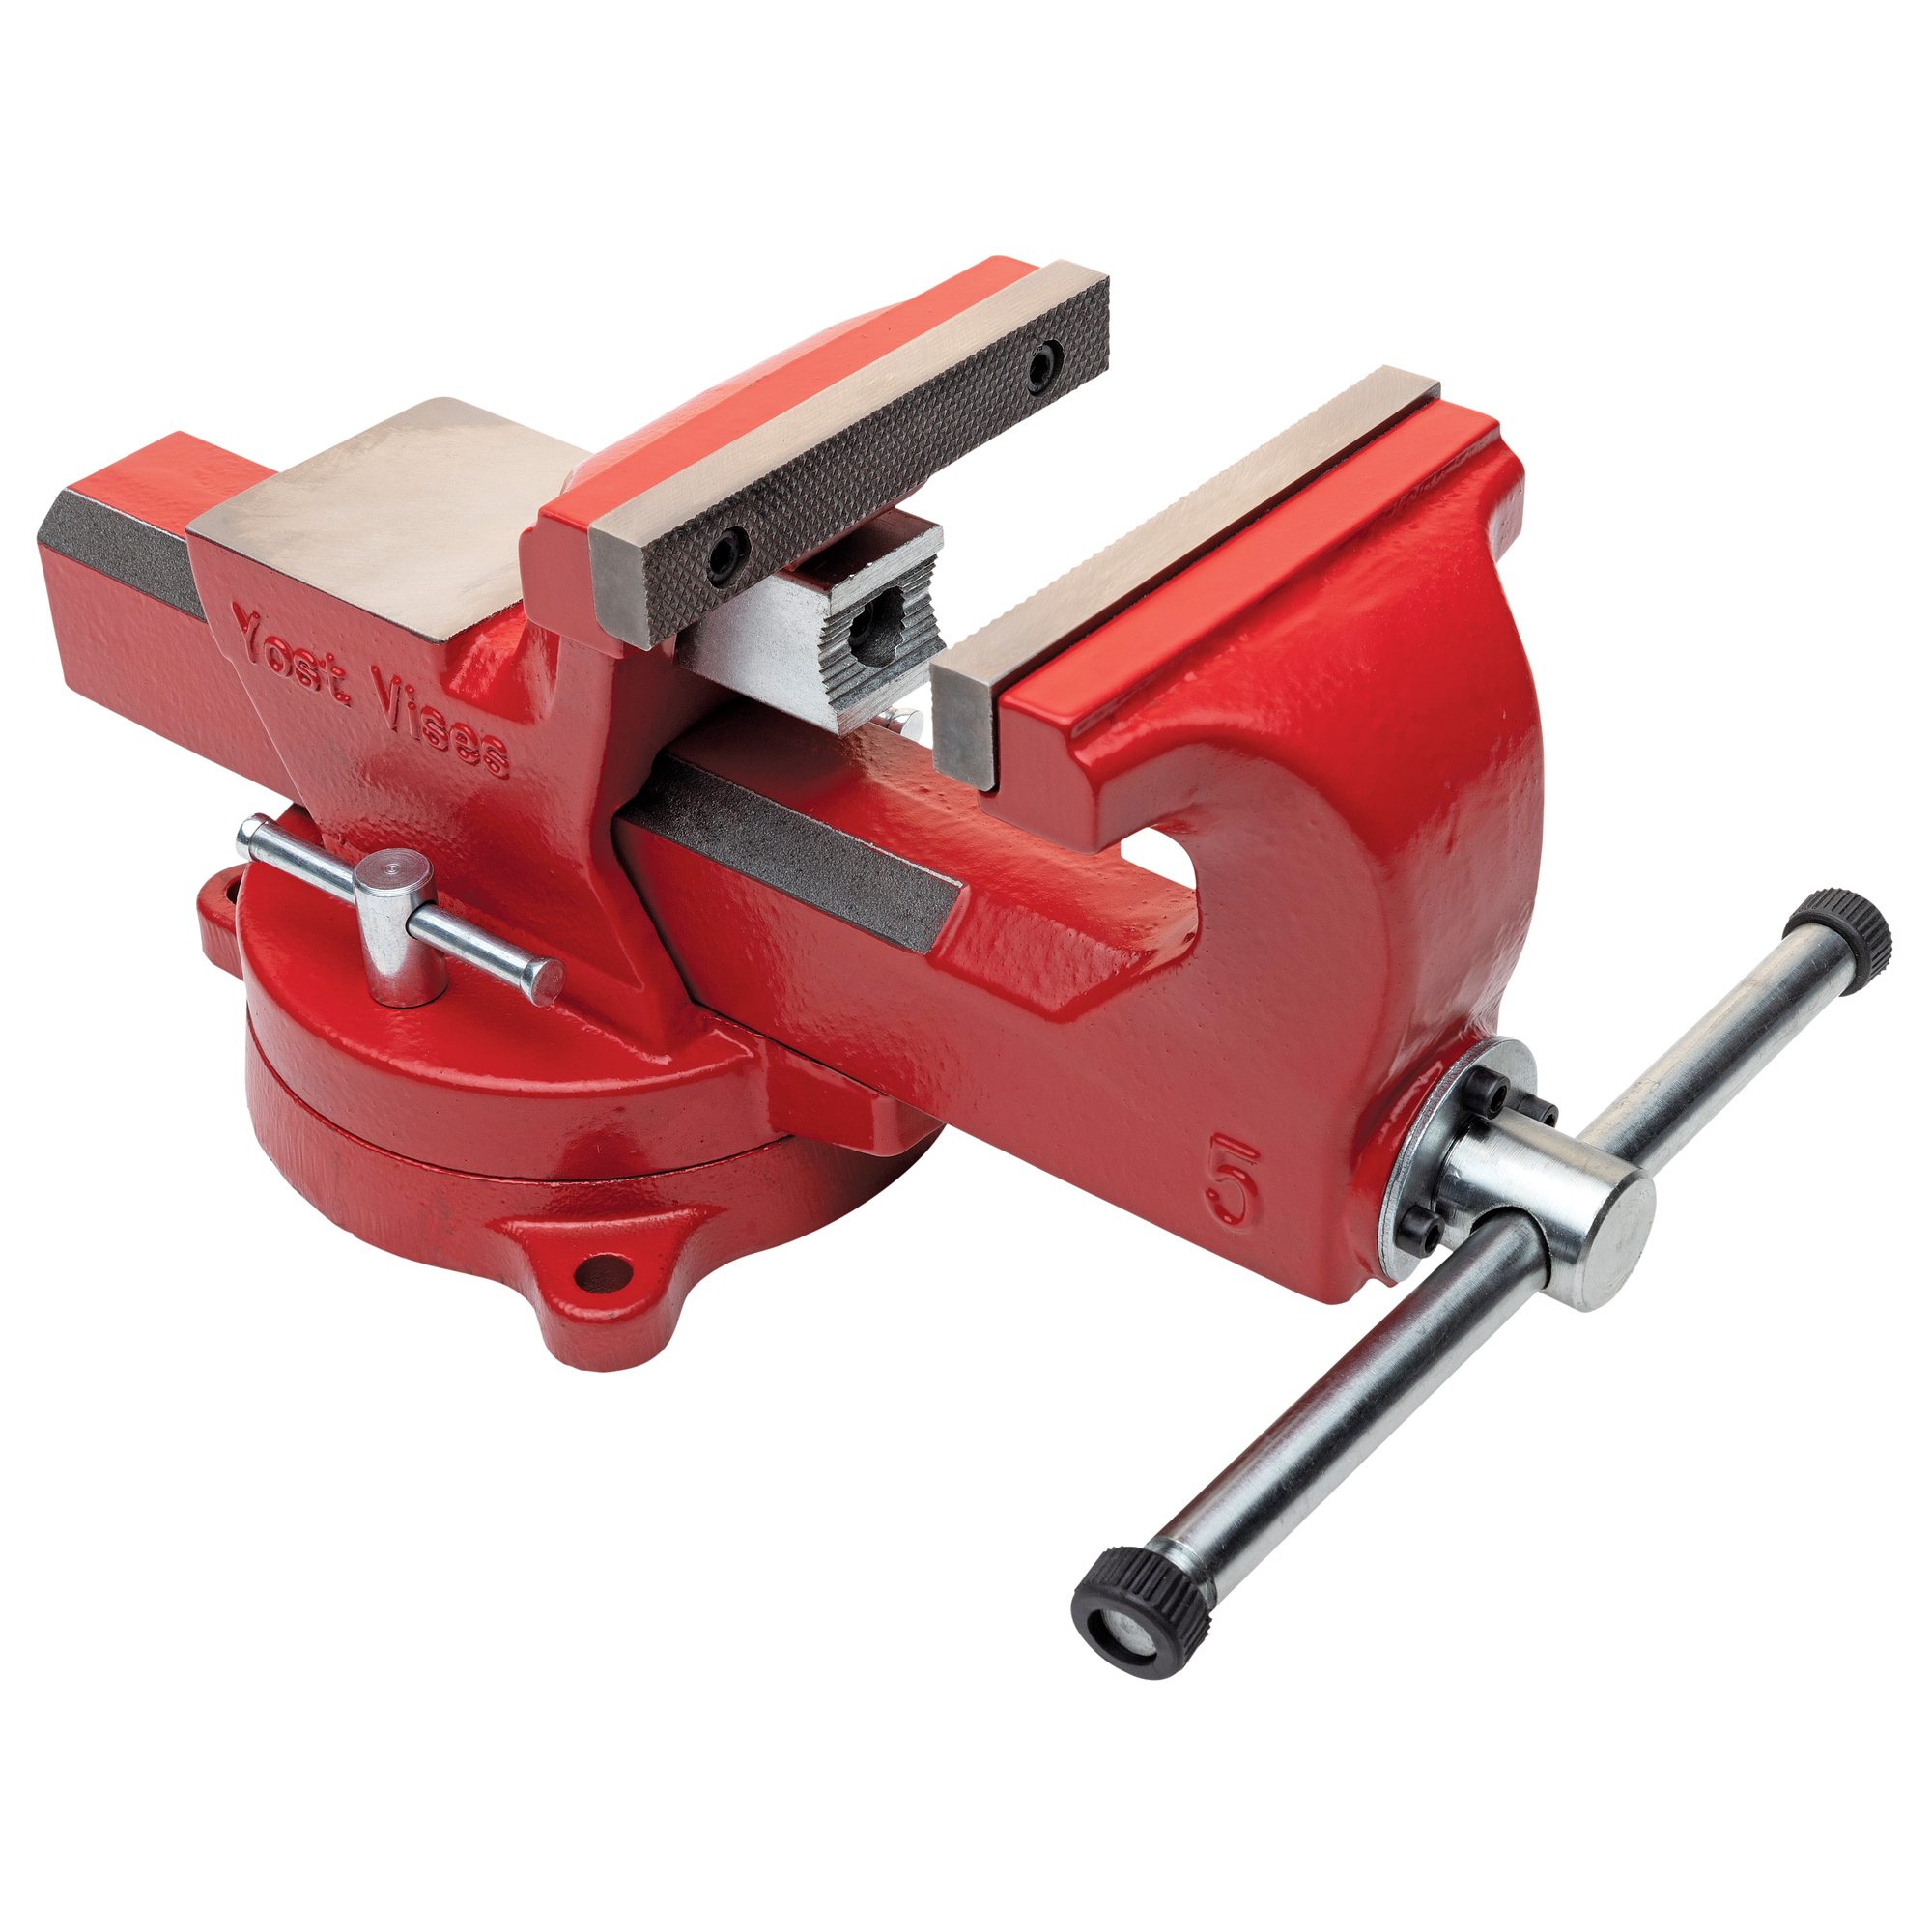 Yost Vises, 5Inch Bench Vise, Jaw Width 5 in, Jaw Capacity 6 in, Material Ductile Iron, Model ADI-5